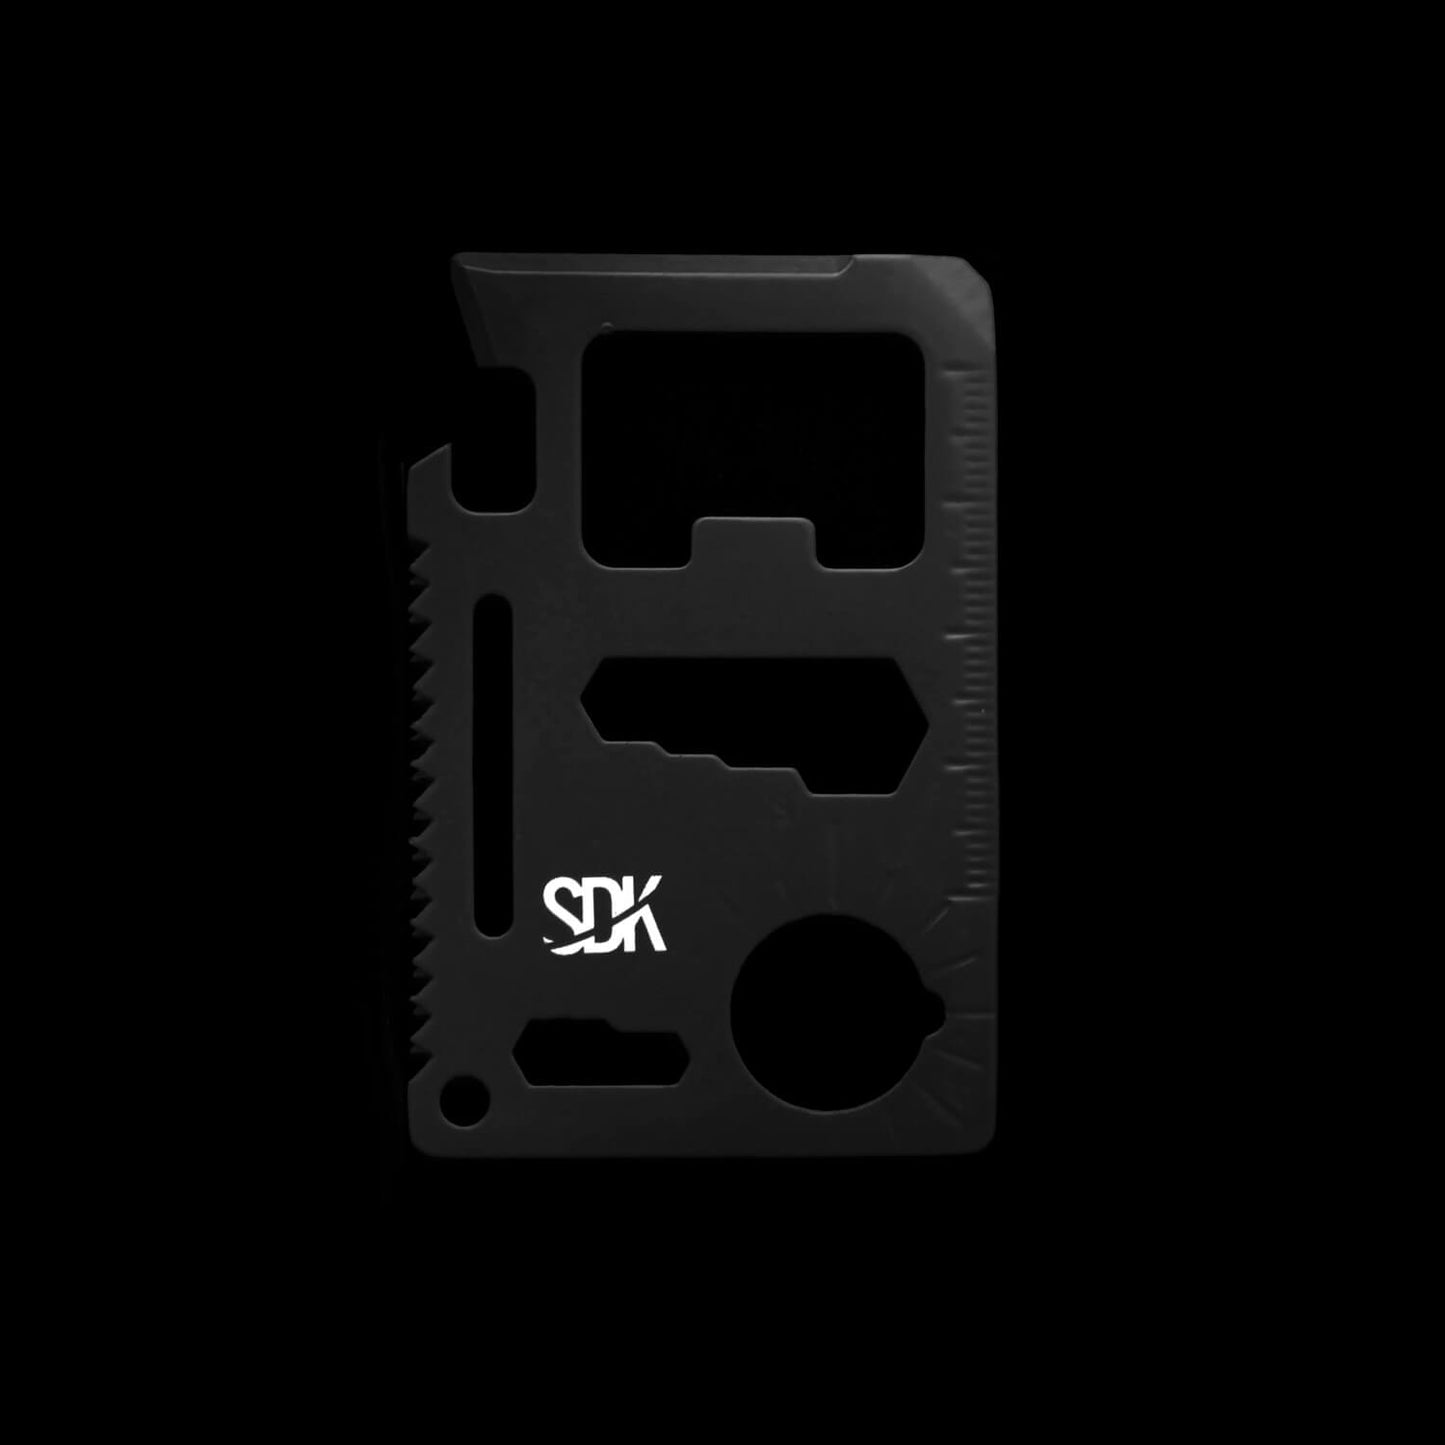 SDK Multi Card Tool, Black (credit card sized stainless steel tool with 10 functions: Can opener, Knife edge, Screwdriver, Ruler, Cap opener, 2 Position wrench, 4 Position wrench, Butterfly wrench, Saw blade and Direction ancillary indication)